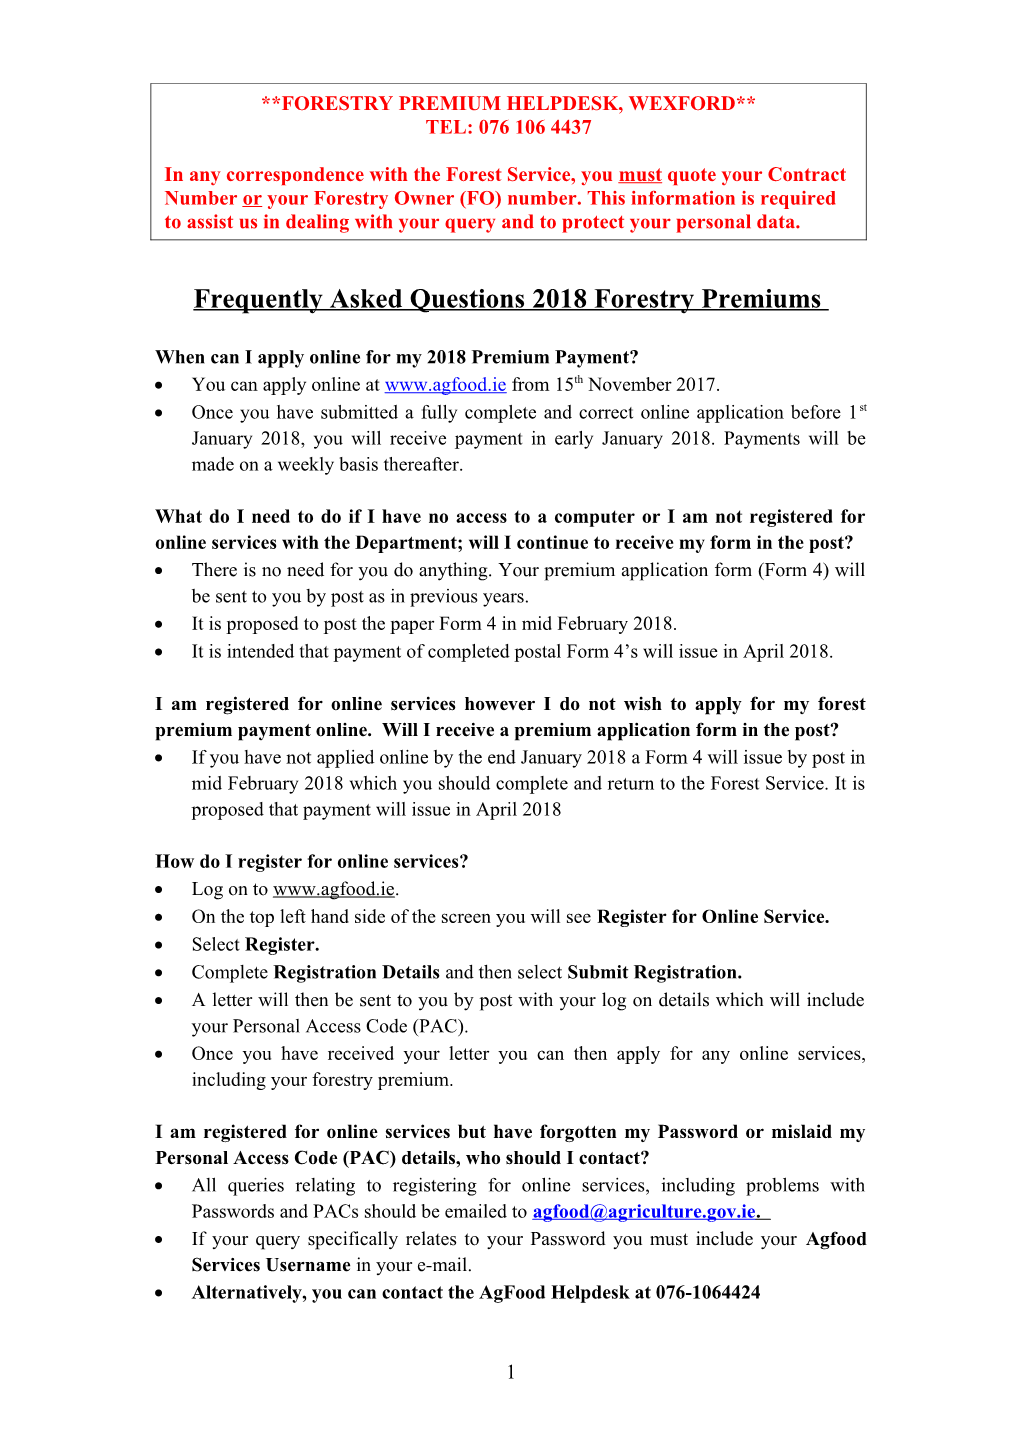 Frequently Asked Question 2014 Premium Payments